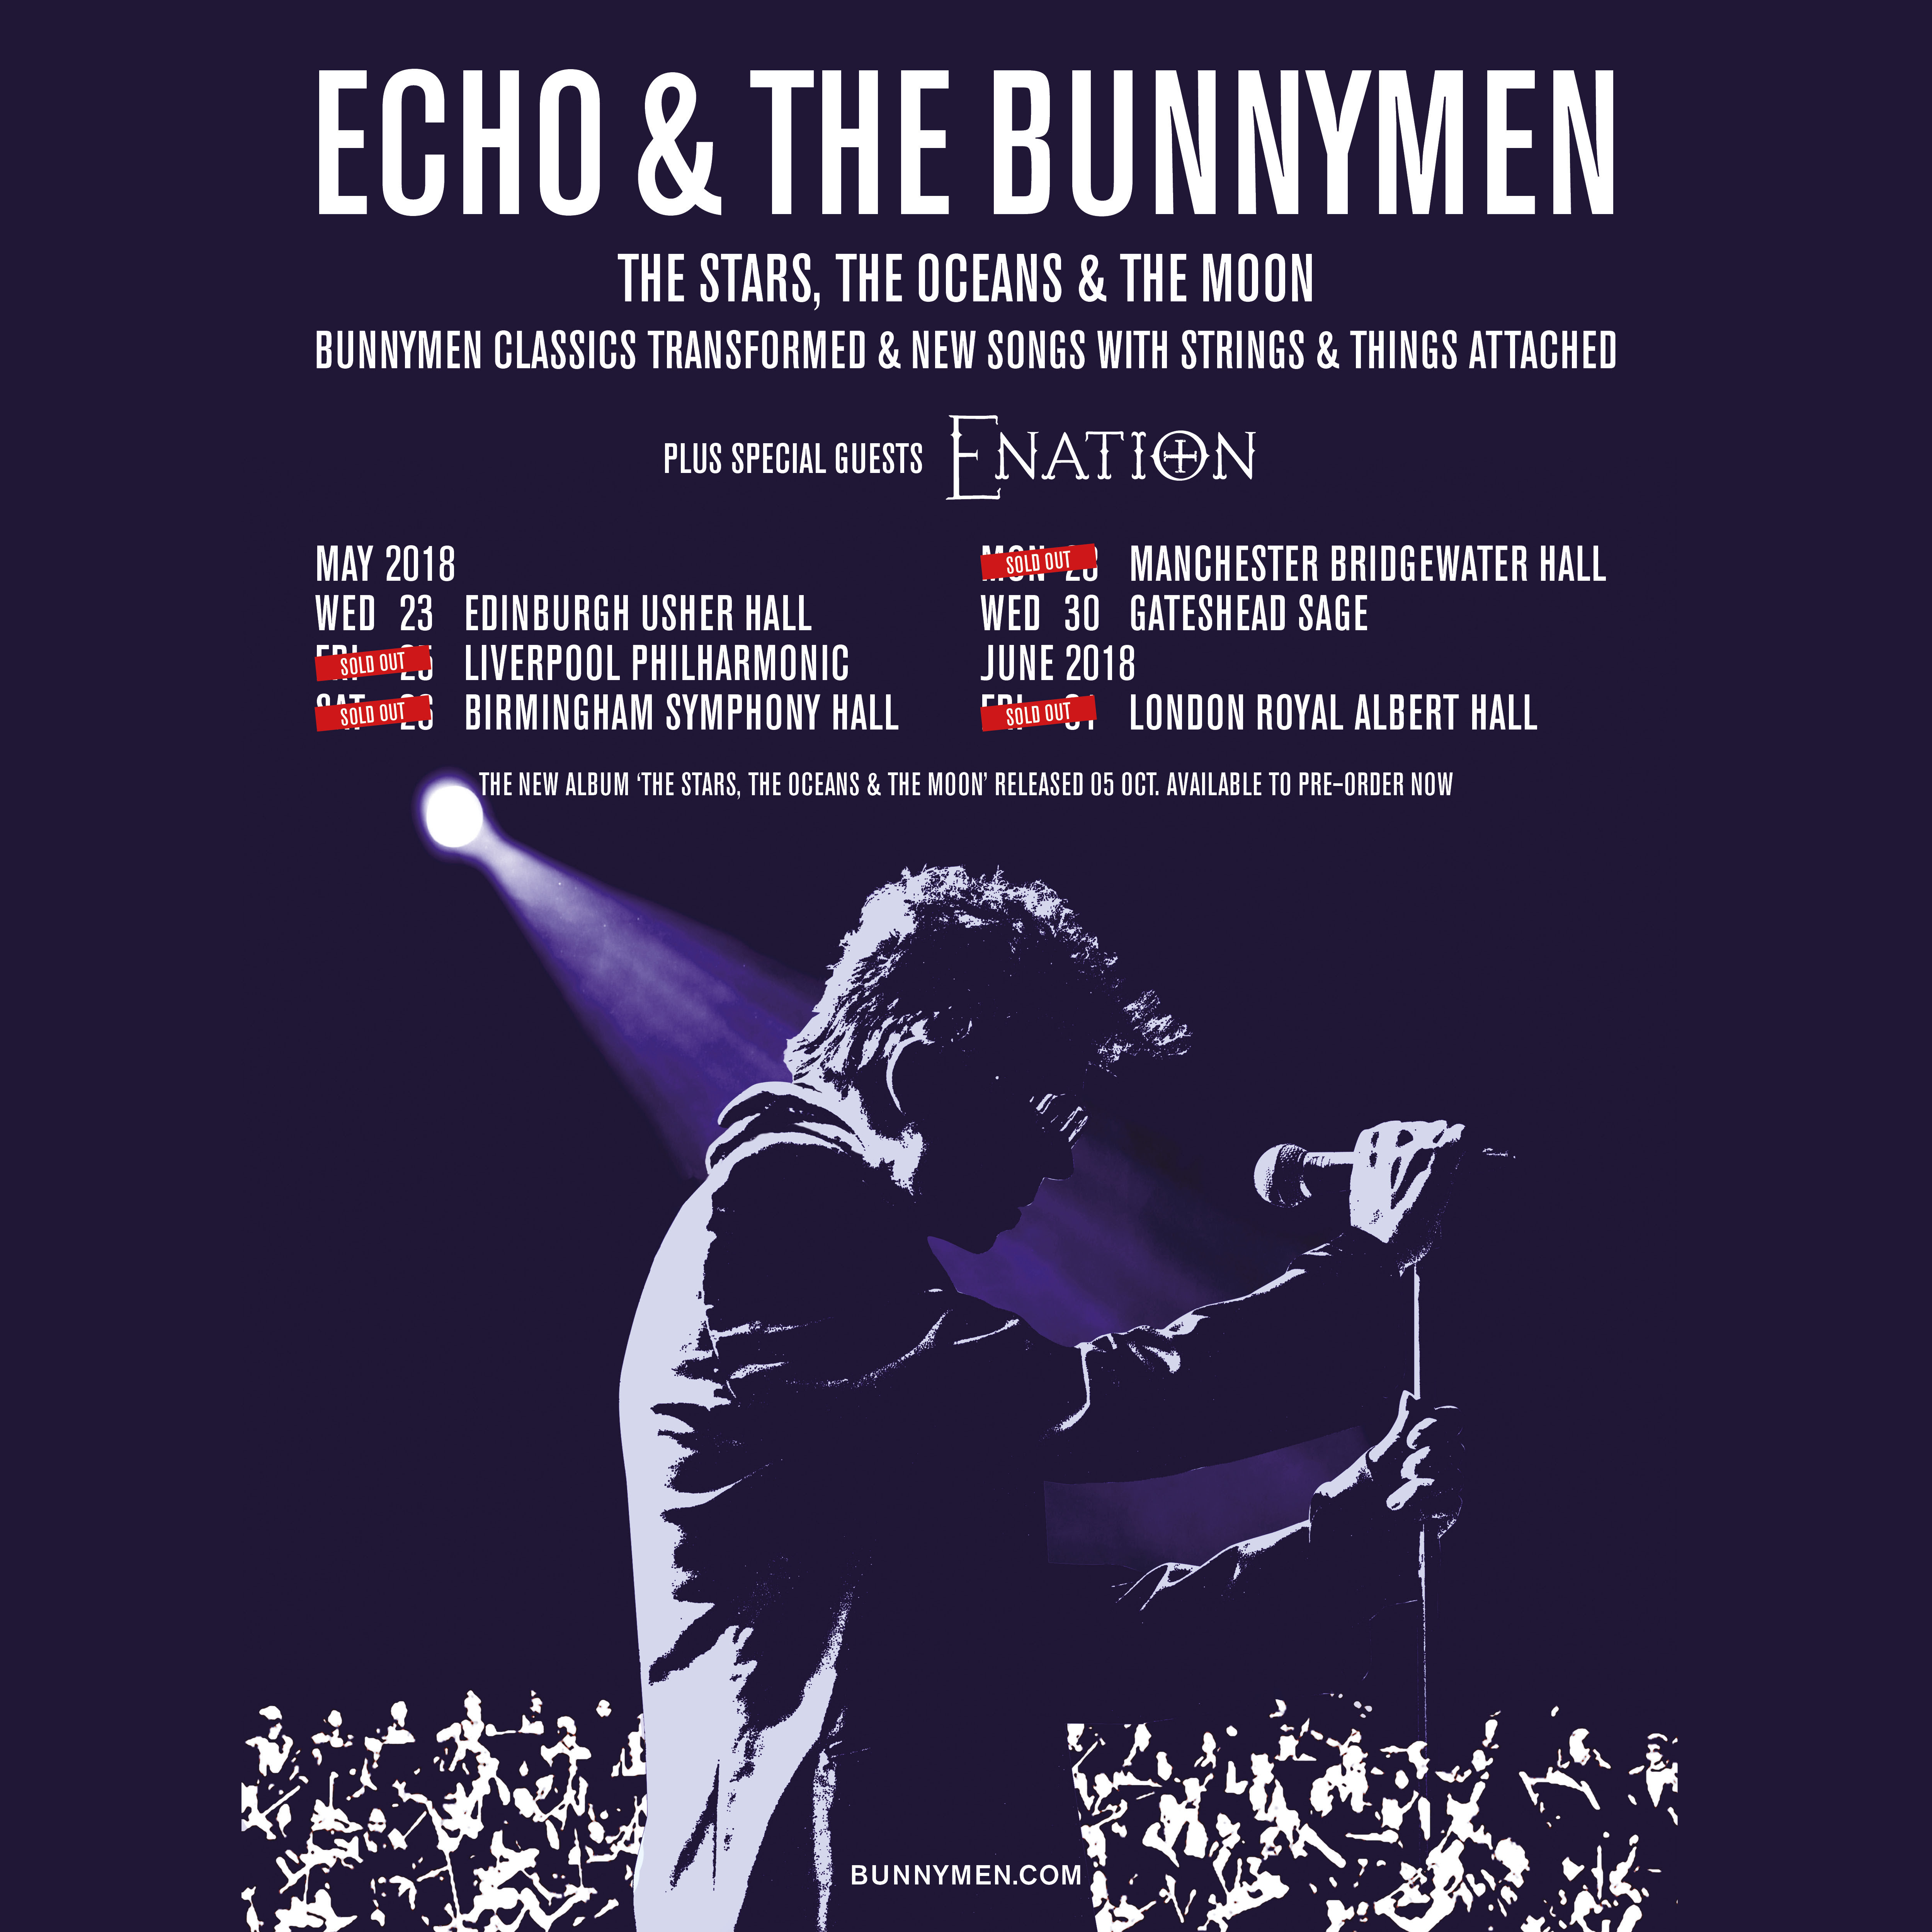 Enatiom support Echo & The Bunnymen on tour + new UK single out now